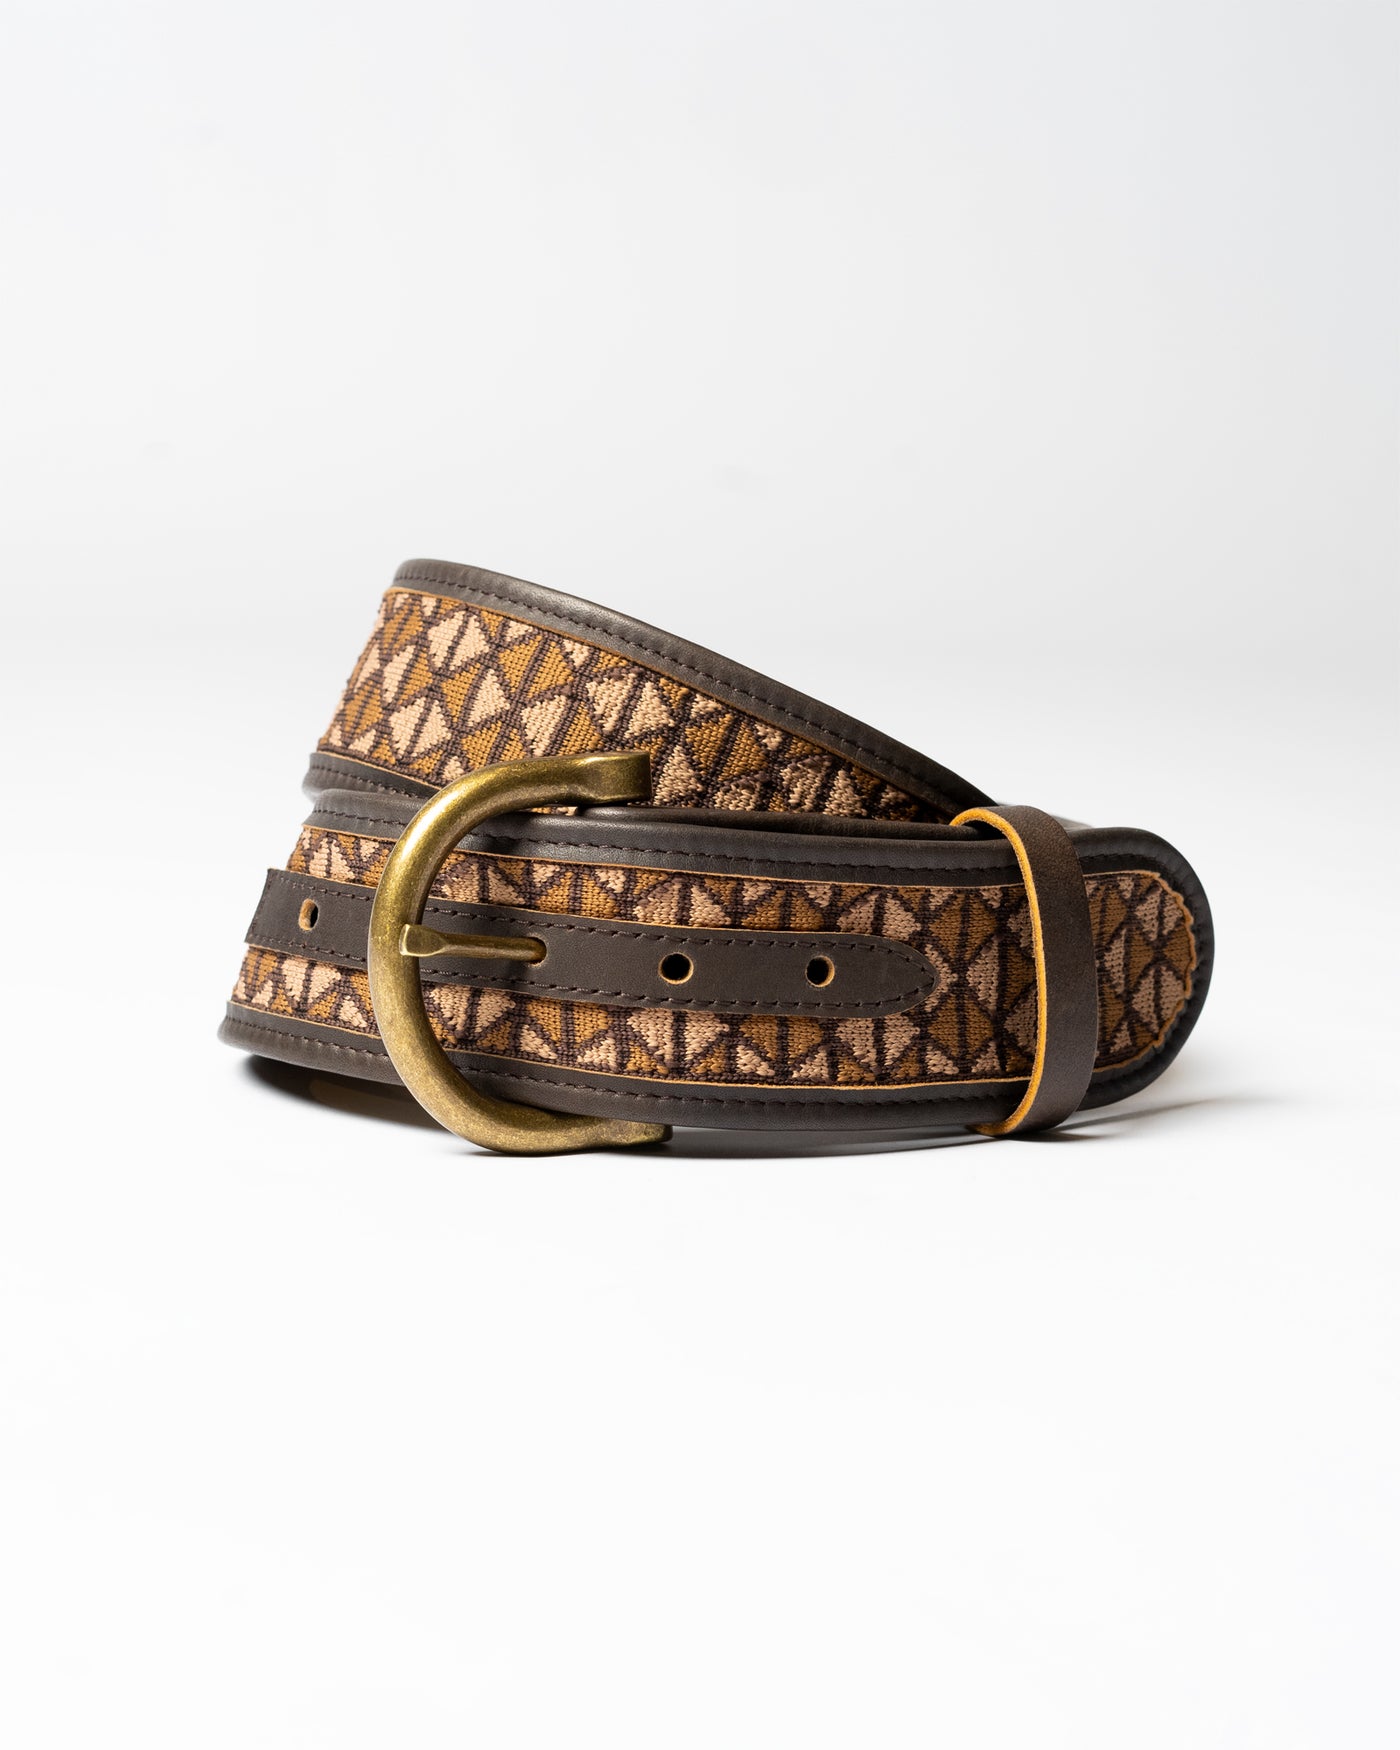 The Chico, Textured-Knit Brown Leather Belt